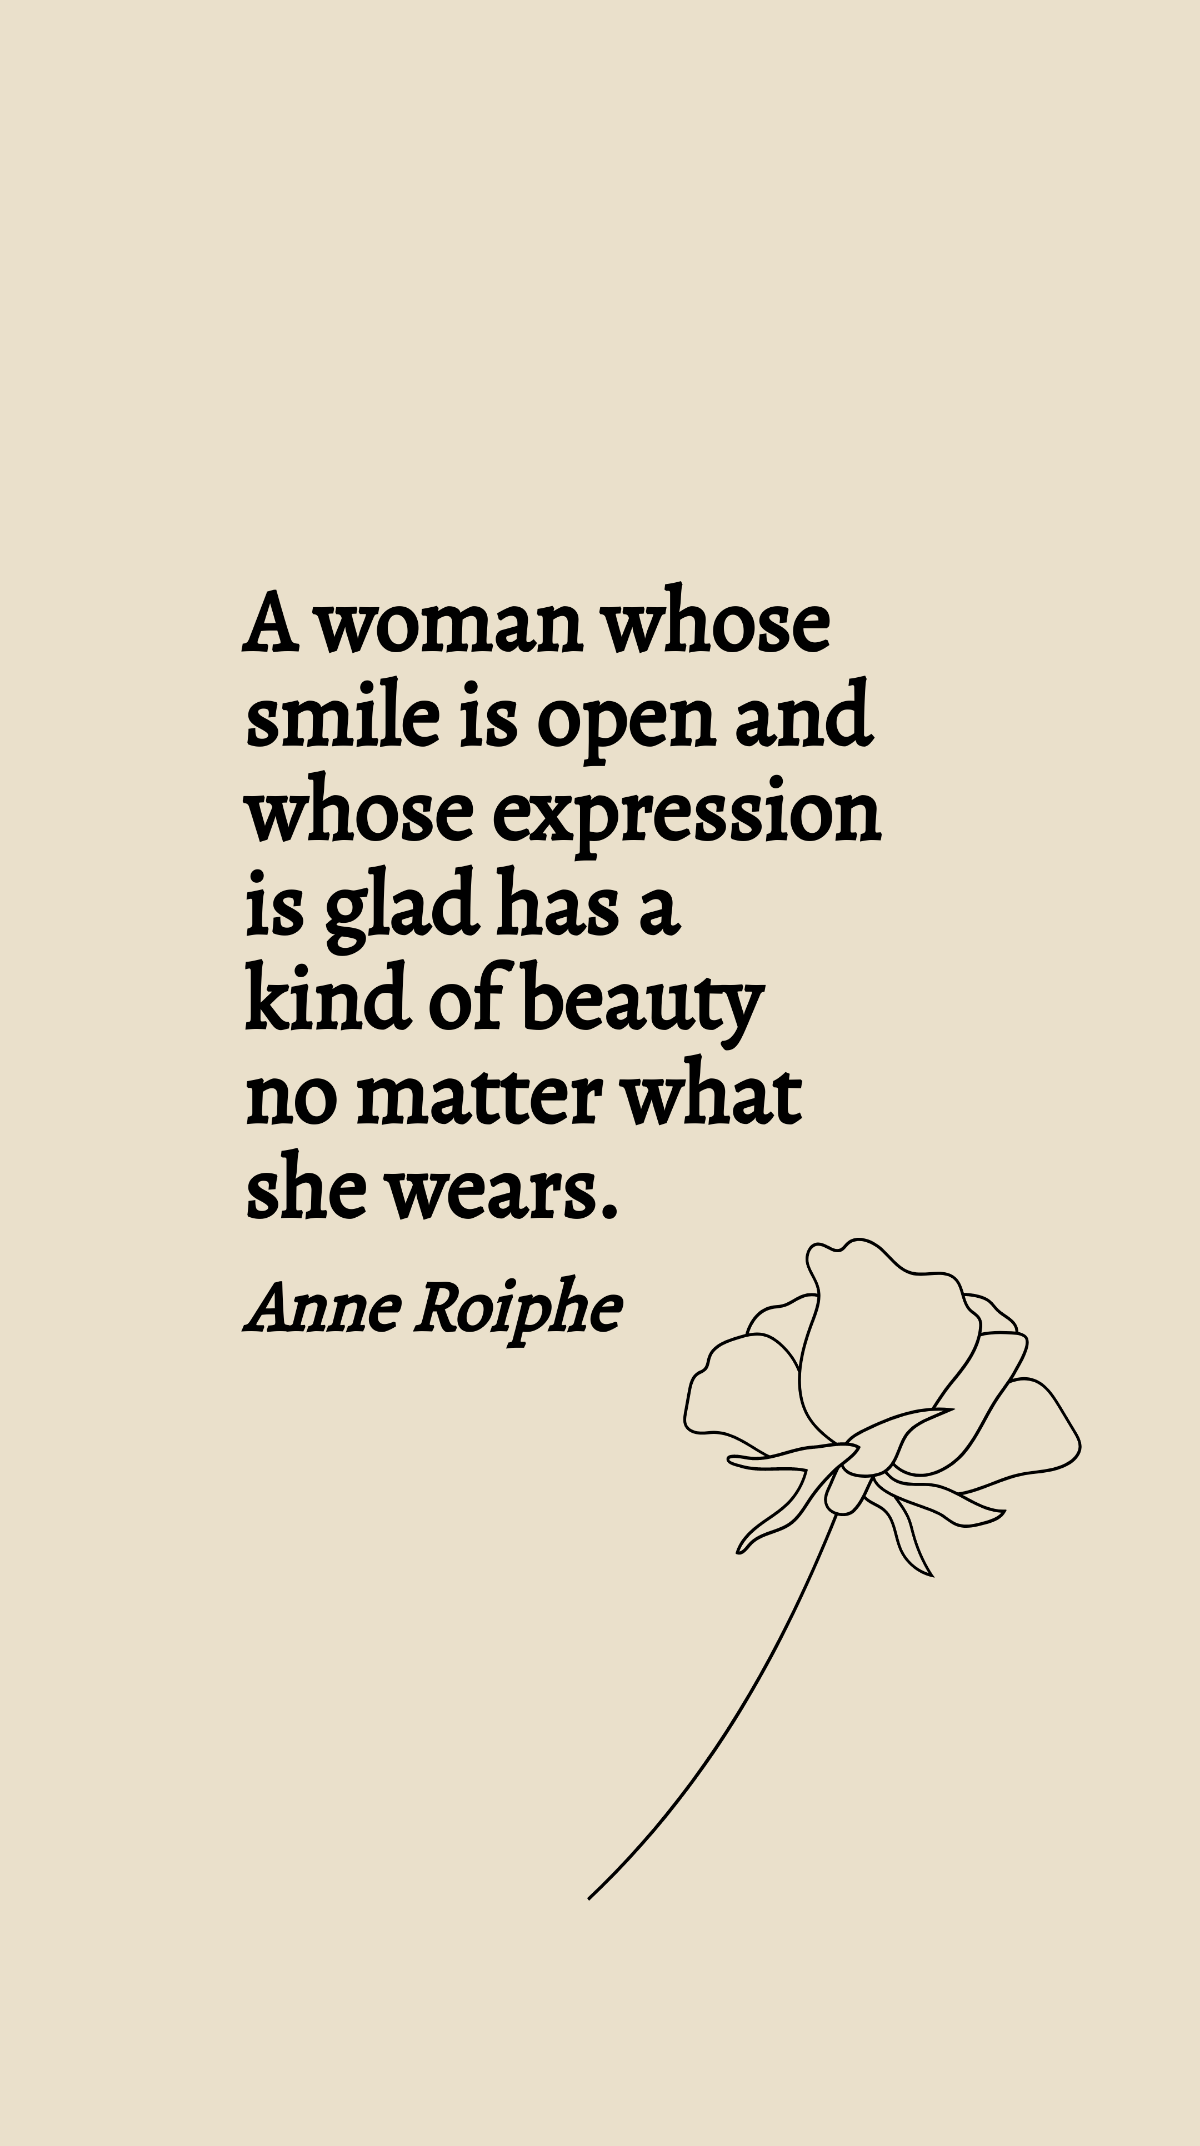 Free Anne Roiphe - A woman whose smile is open and whose expression is glad has a kind of beauty no matter what she wears. Template